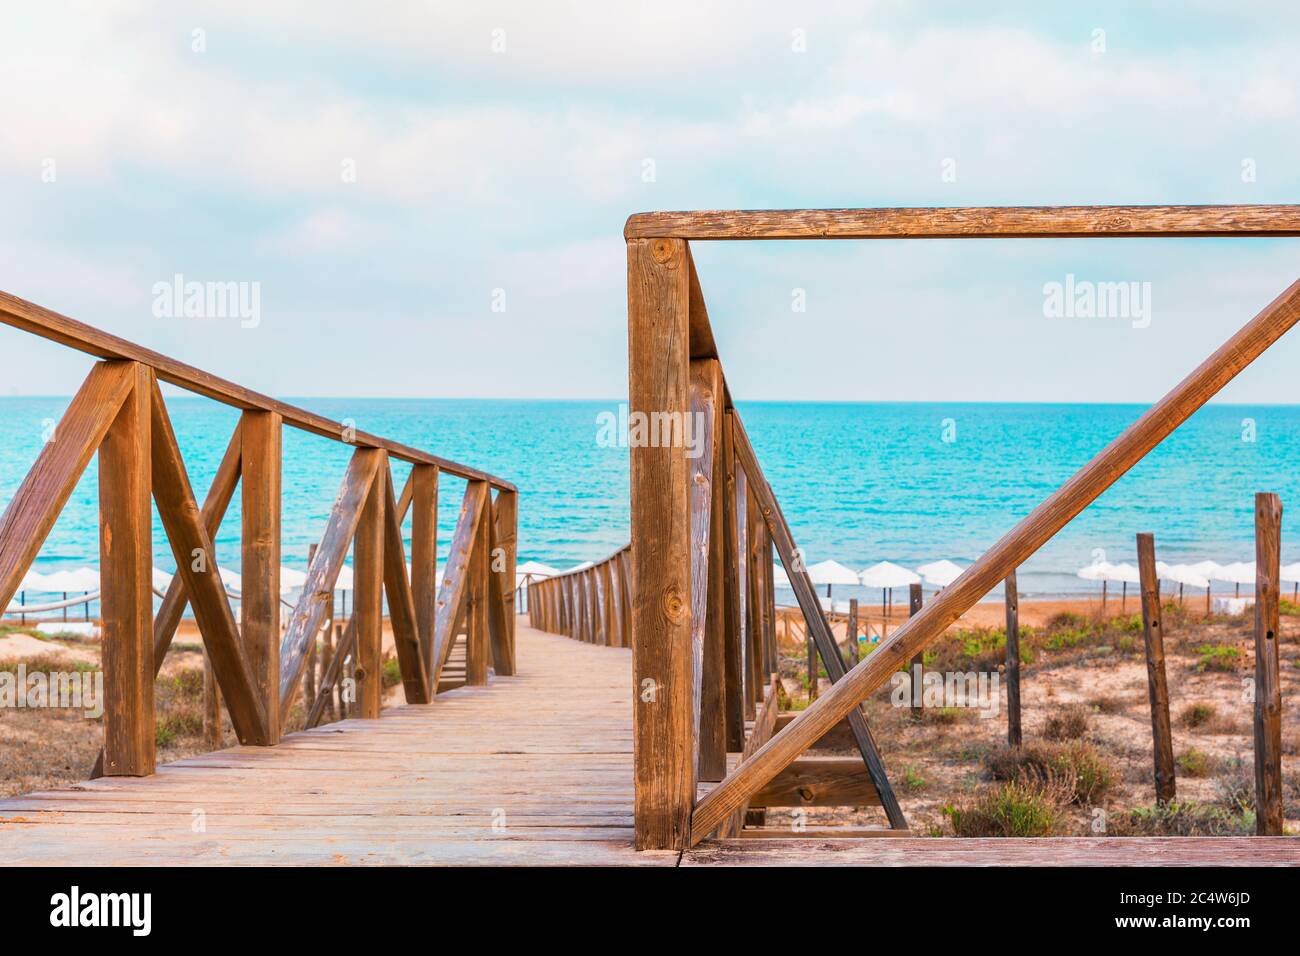 view of Guardamar beach in alicante spain through the wooden access to the beach Stock Photo